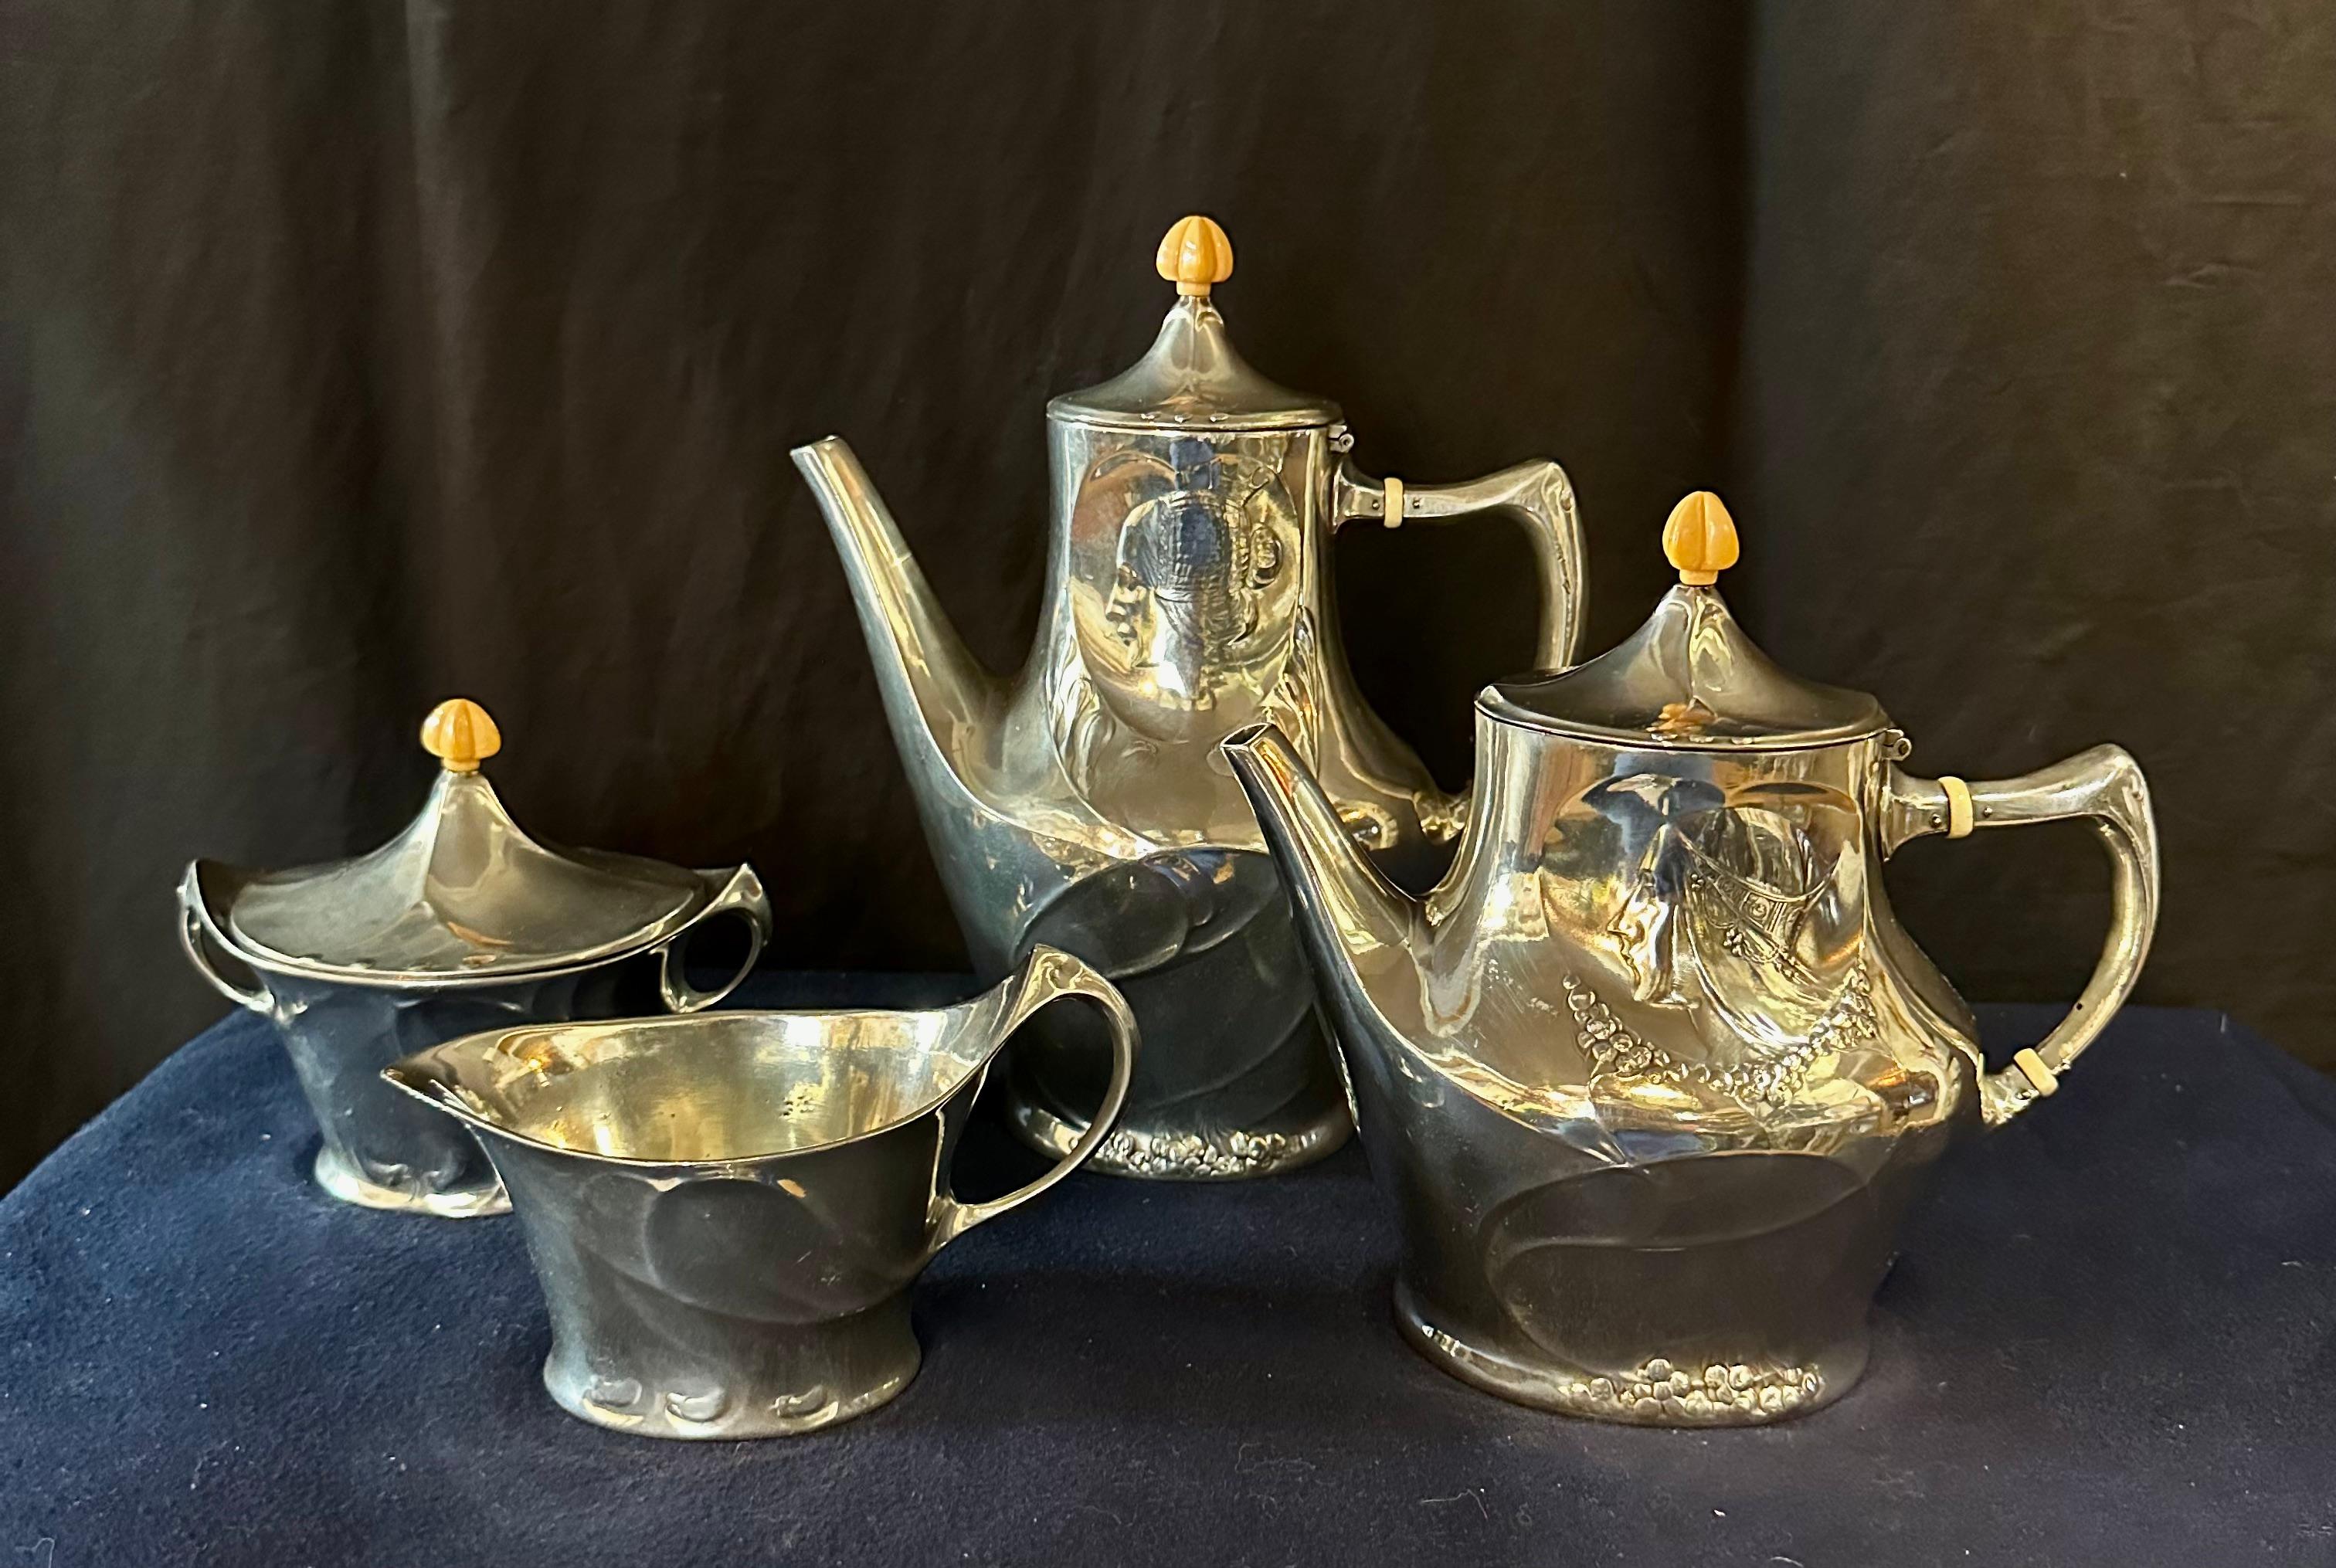 This vintage early 20th century tea service with serving tray is designed & produced by “Liberty & Co.”. The high polished pewter pieces are decorated with stylish, but distinctive Art Nouveau period motifs over its surfaces. On the tray, one finds